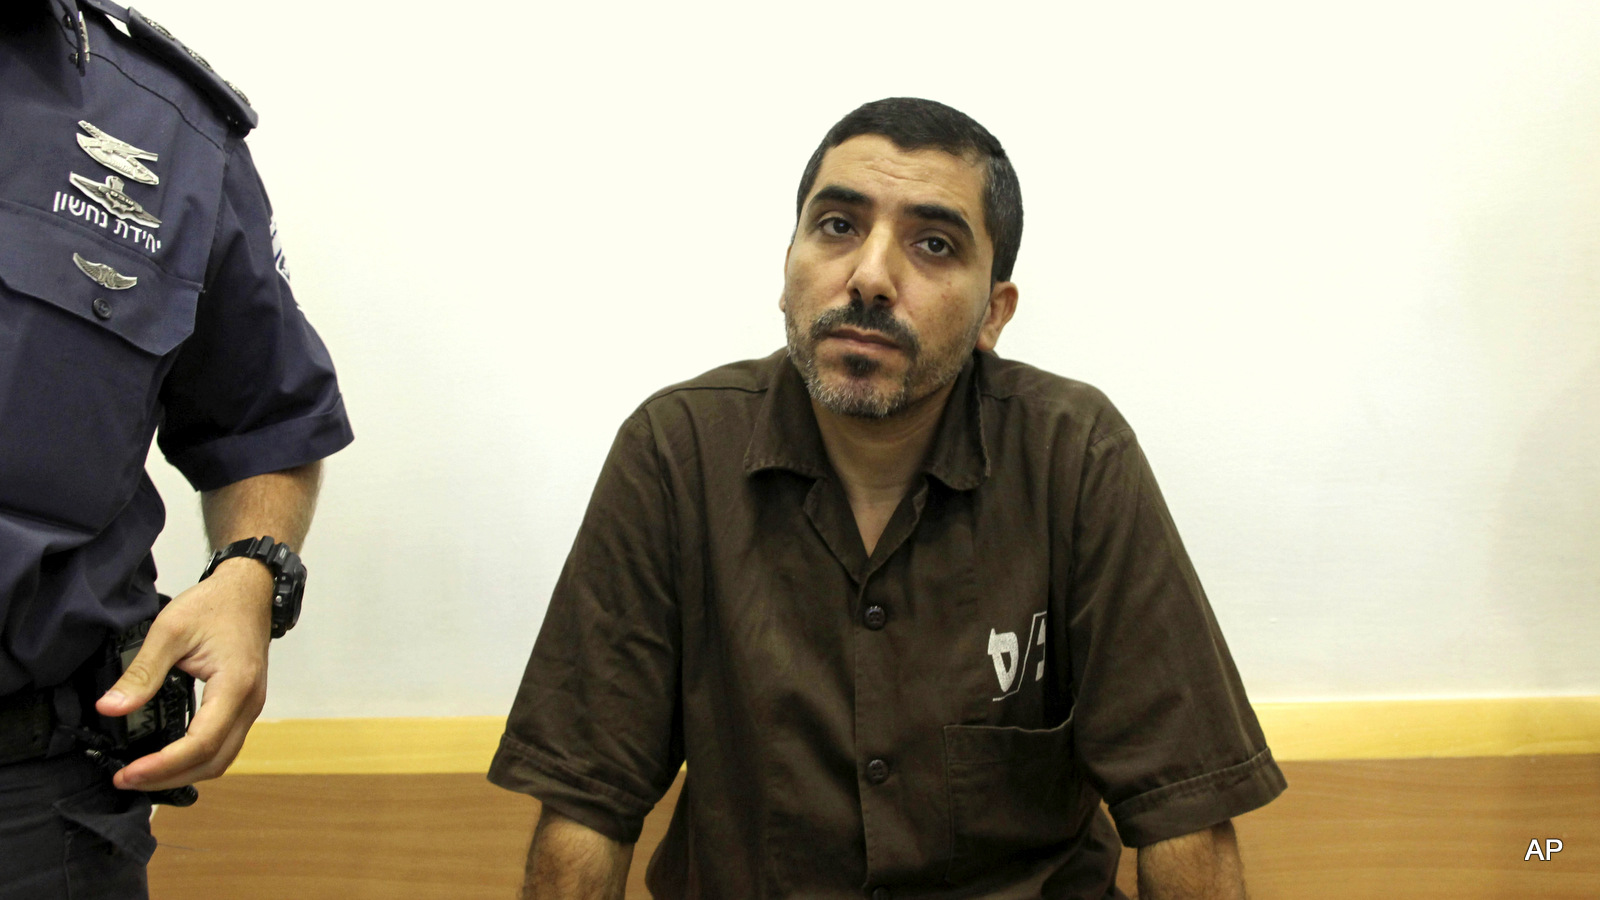 Palestinian engineer Dirar Abu Sisi, accused of masterminding Hamas' rocket program and training fighters in Gaza, attends a court session in the southern Israeli town of Beersheba, Thursday, June 16, 2011. 